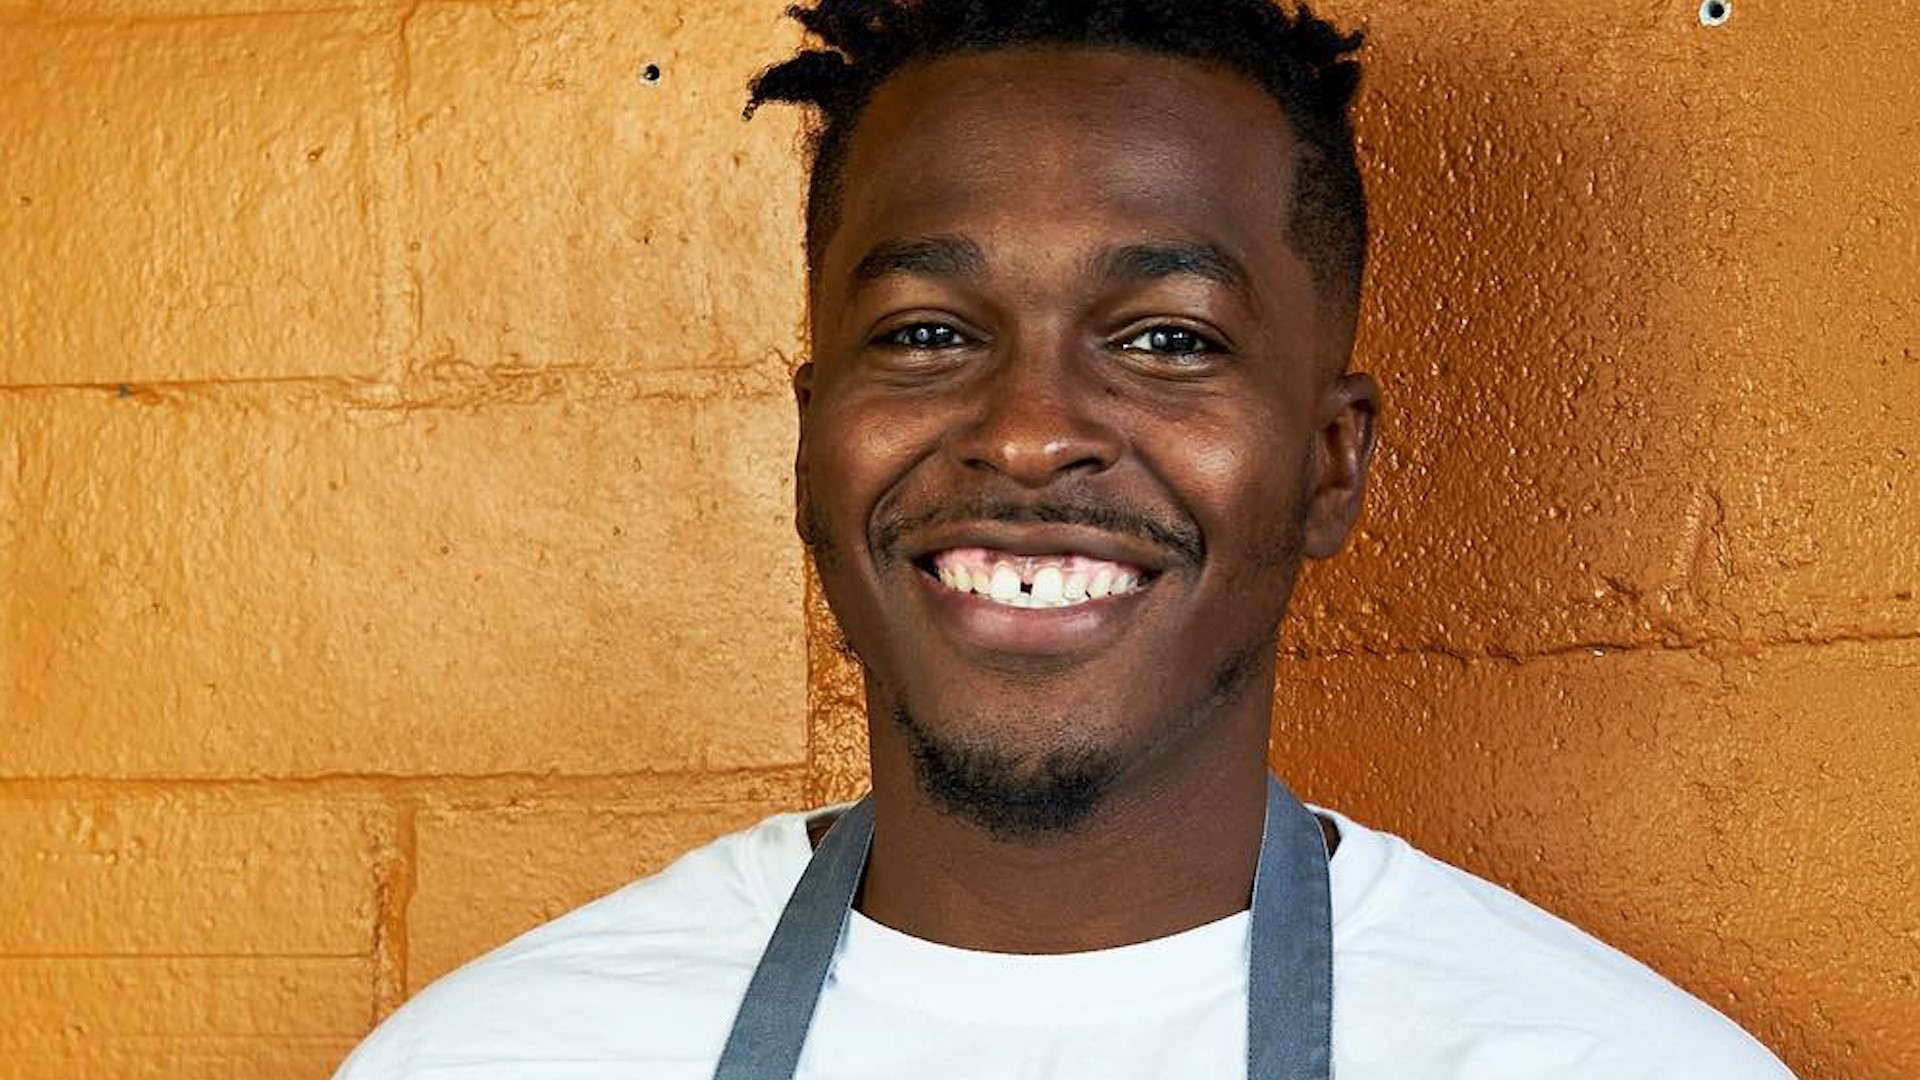 Jonny Rhodes has transitioned from table to farm. After closing his critically acclaimed neo-soul food restaurant, Jonny is on a mission to fight food apartheid.